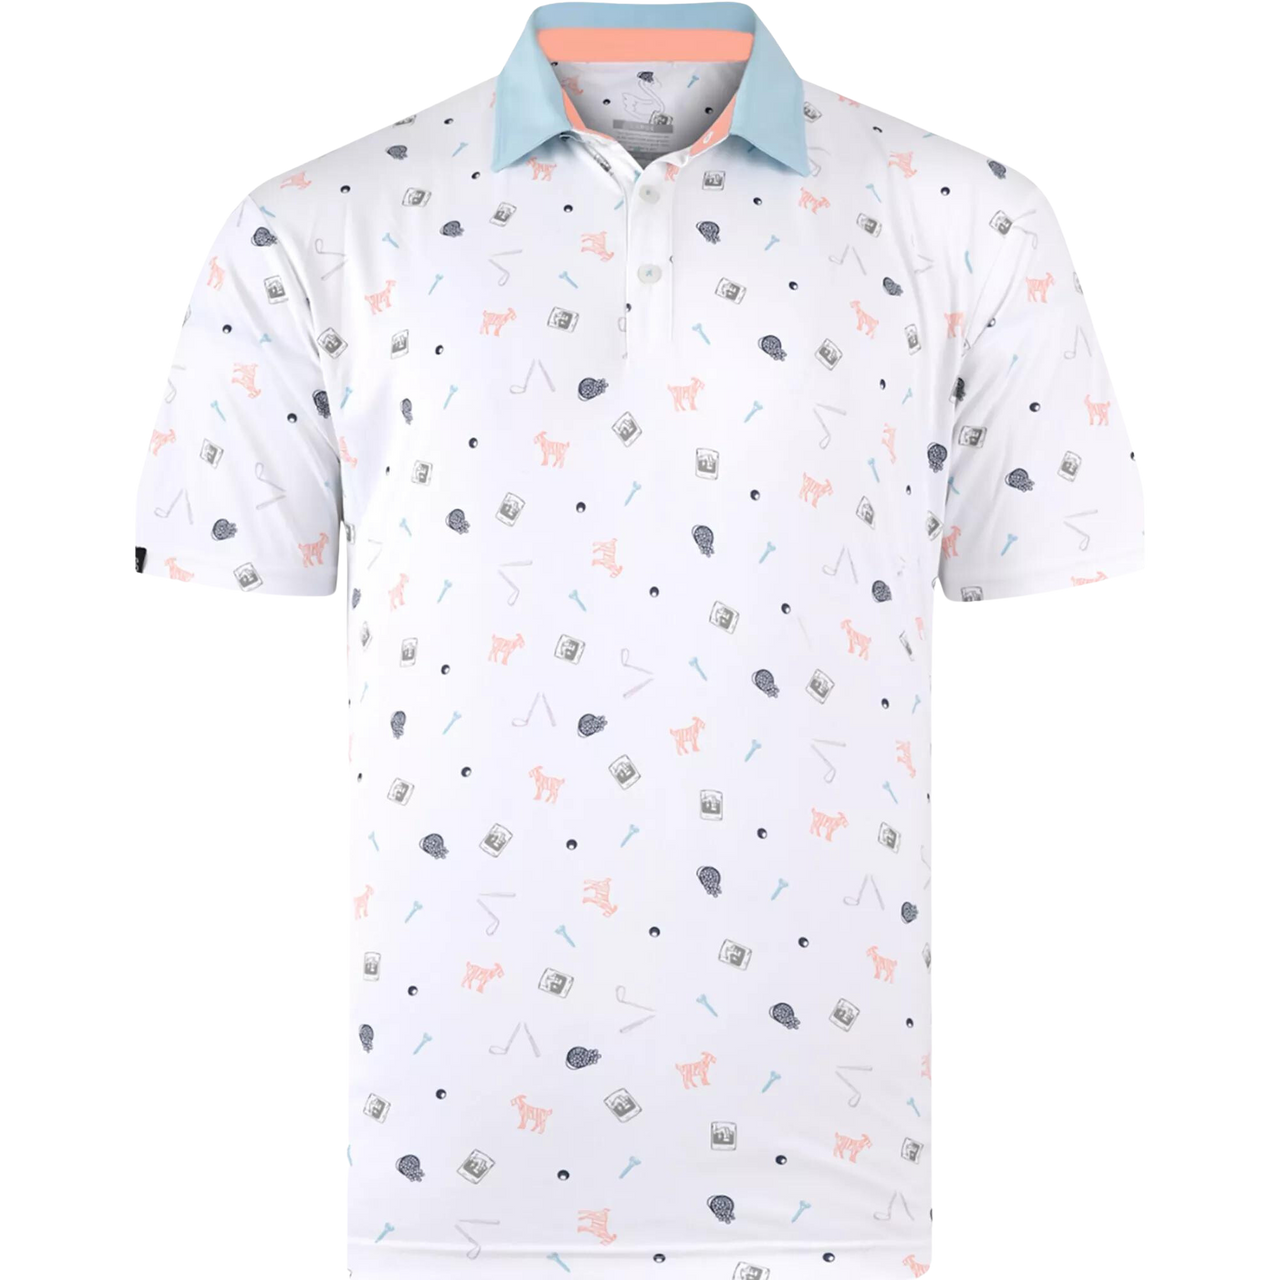 Swannies Golf Amendt Men's Polo